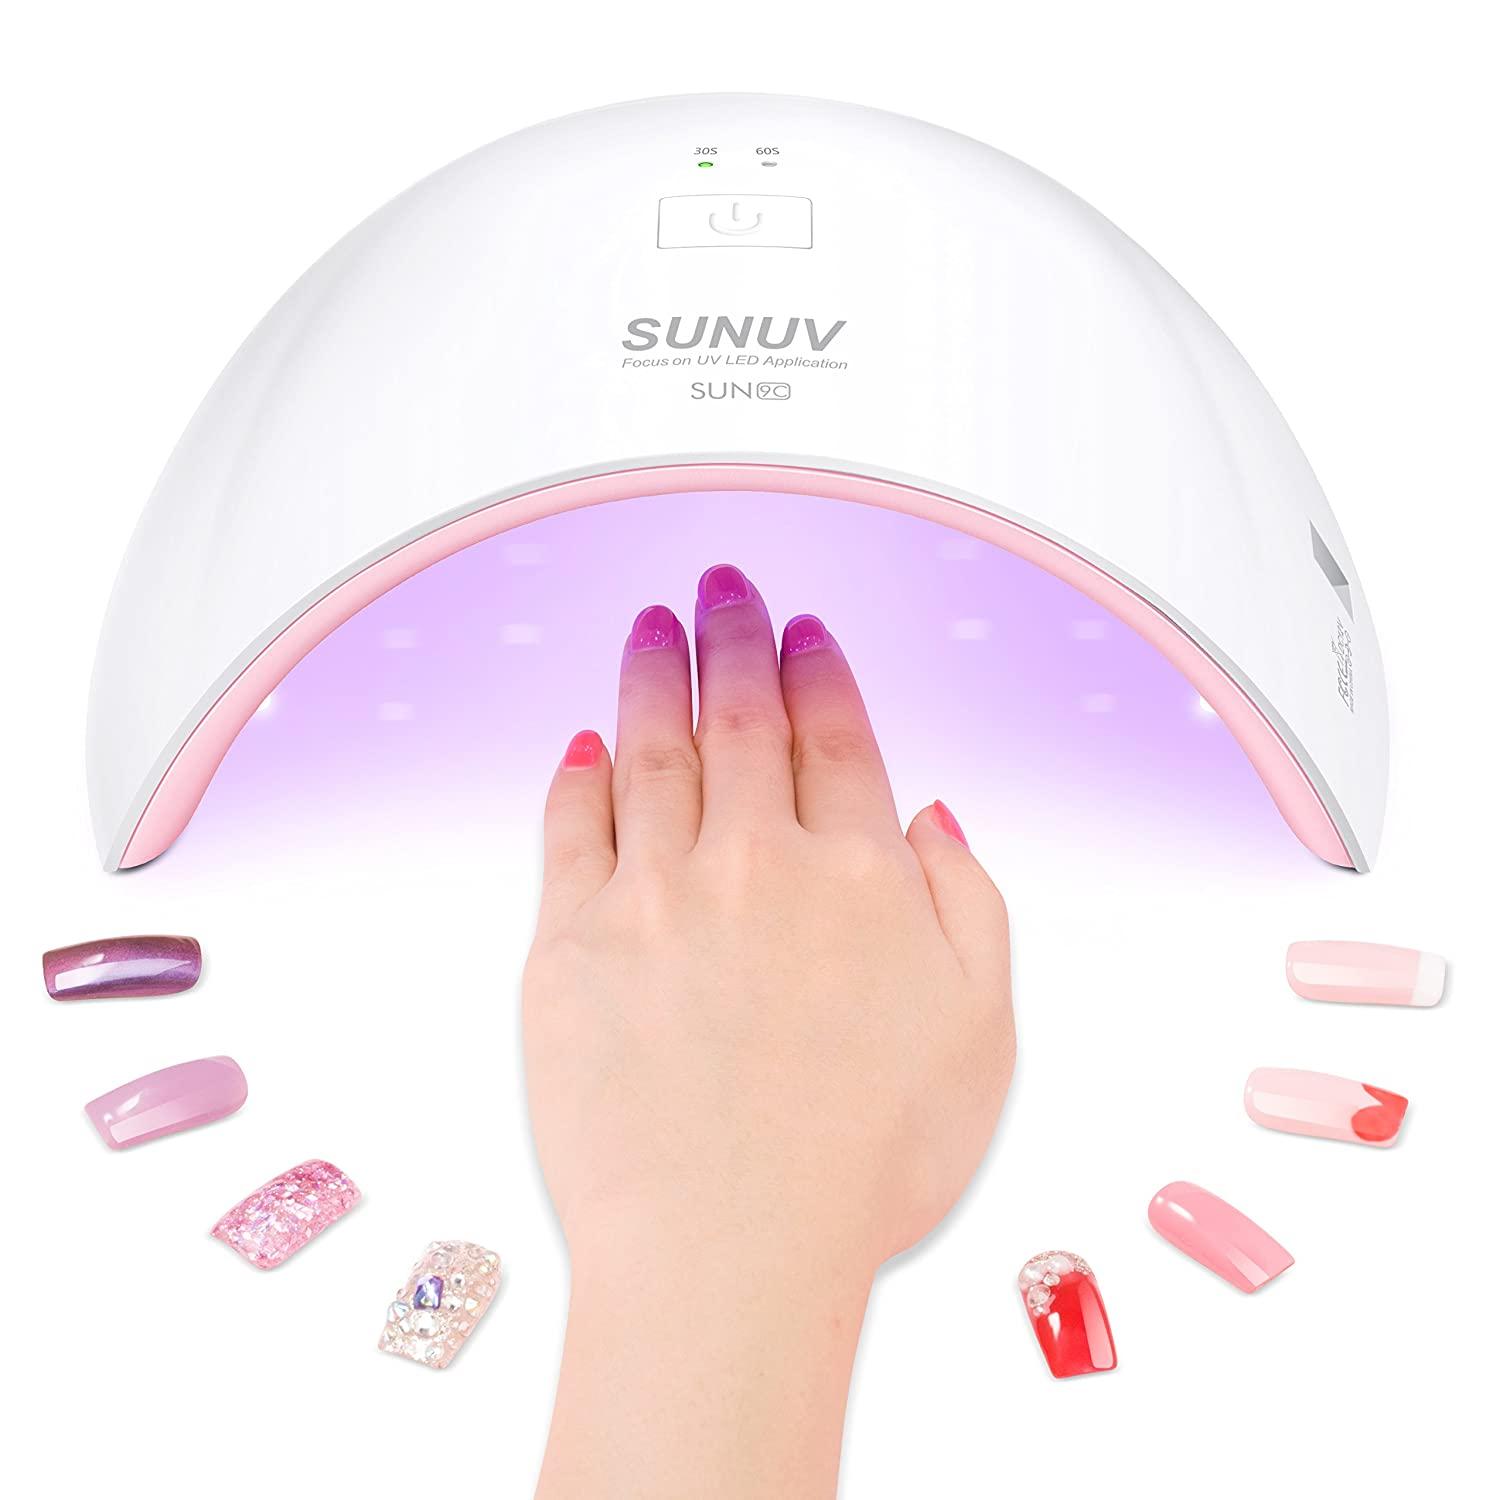 UV LED Gel Nail Lamp,Professional 120W UV Nail Light for Gel Polish Fast  Curing with 45 Lamp Beads, Lightweight LED Gel UV Nail Dryer for Salon Home  - Walmart.com